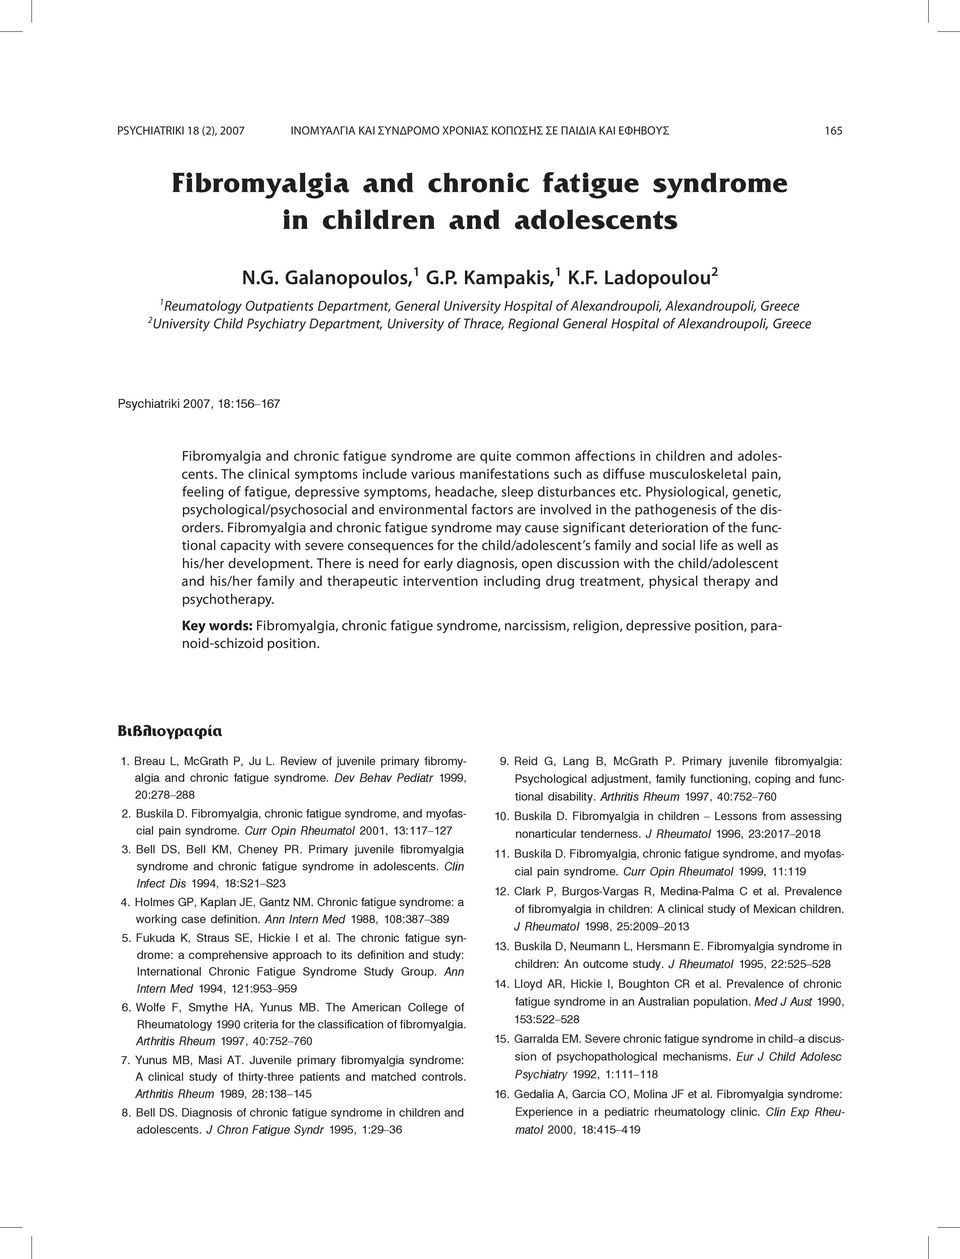 General Hospital of Alexandroupoli, Greece Psychiatriki 2007, 18:156 167 Fibromyalgia and chronic fatigue syndrome are quite common affections in children and adolescents.